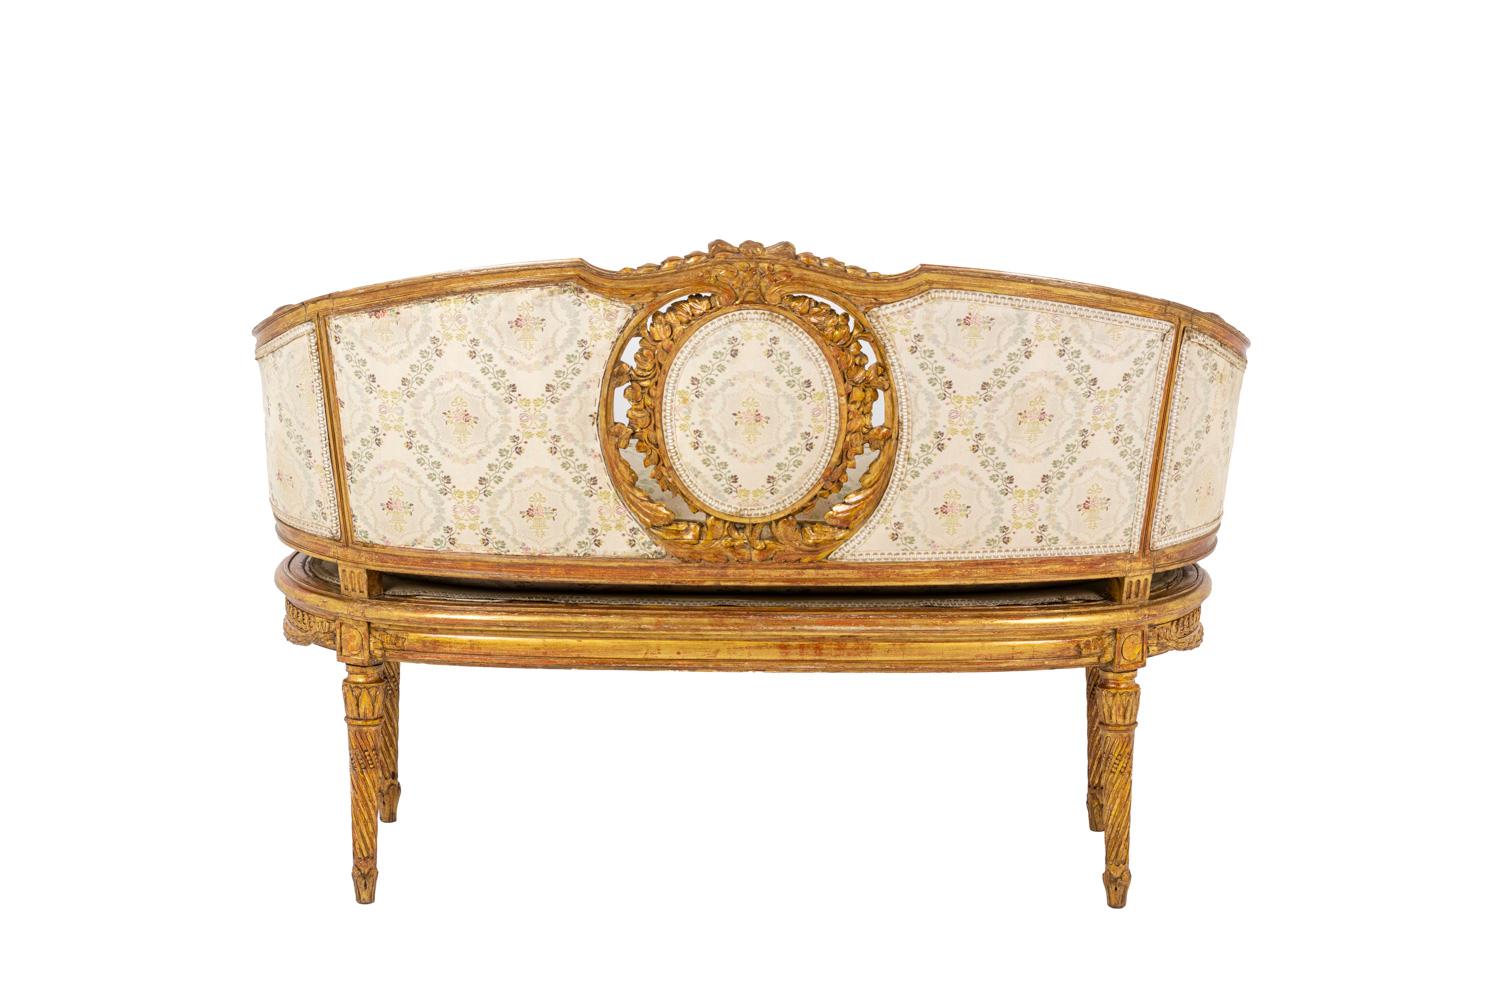 20th Century Transition Style Sofa in Giltwood, 1900's